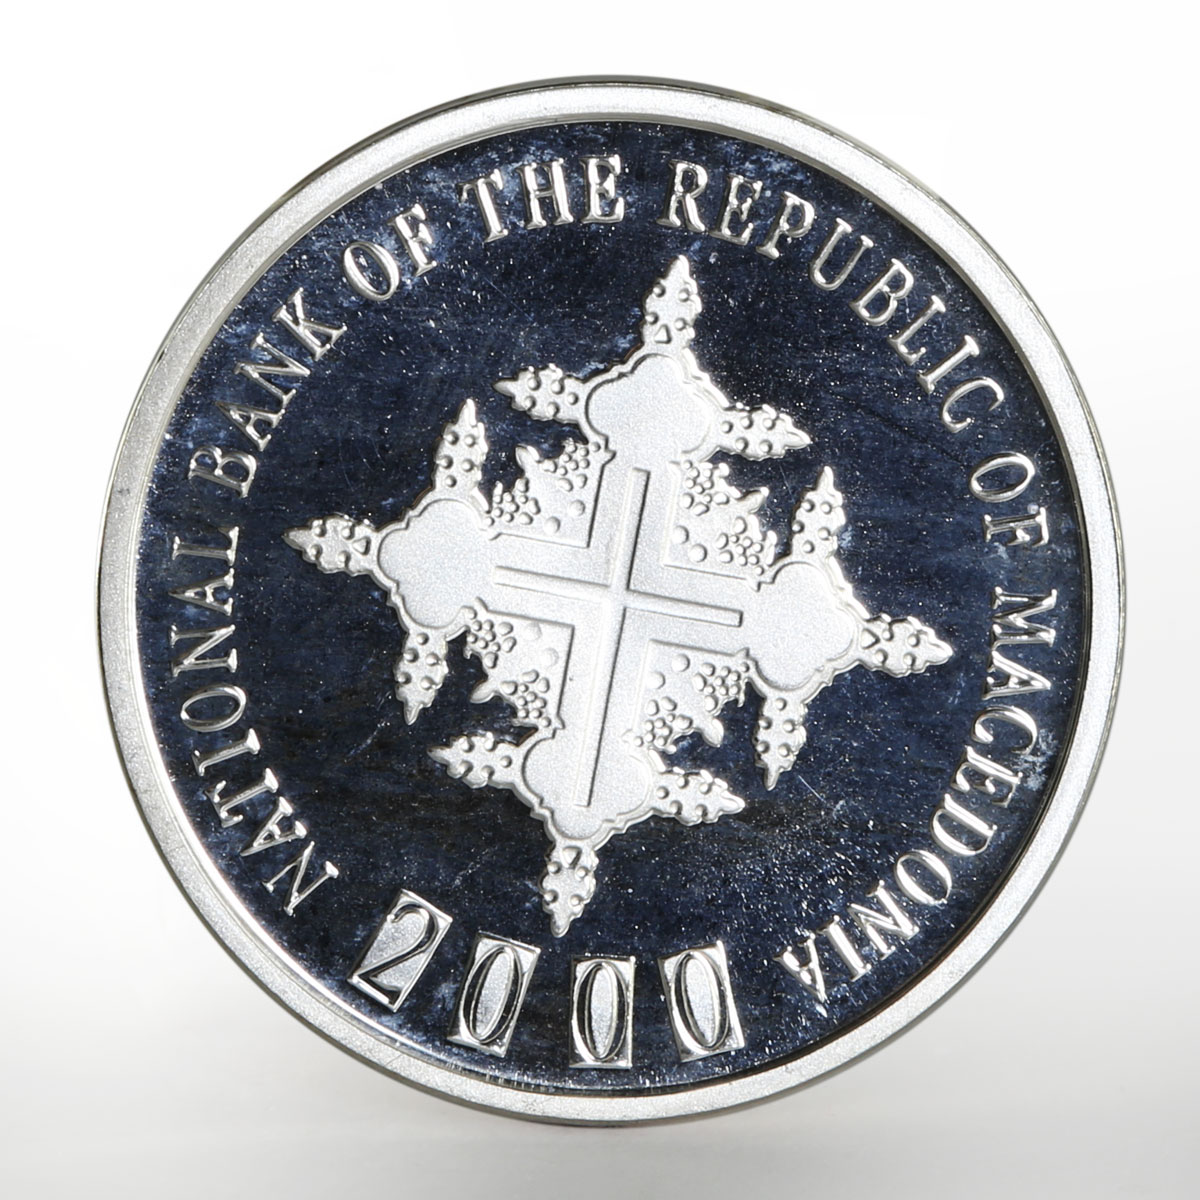 Macedonia 1 denar 2000th Anniversary of Christianity proof silver coin 2000